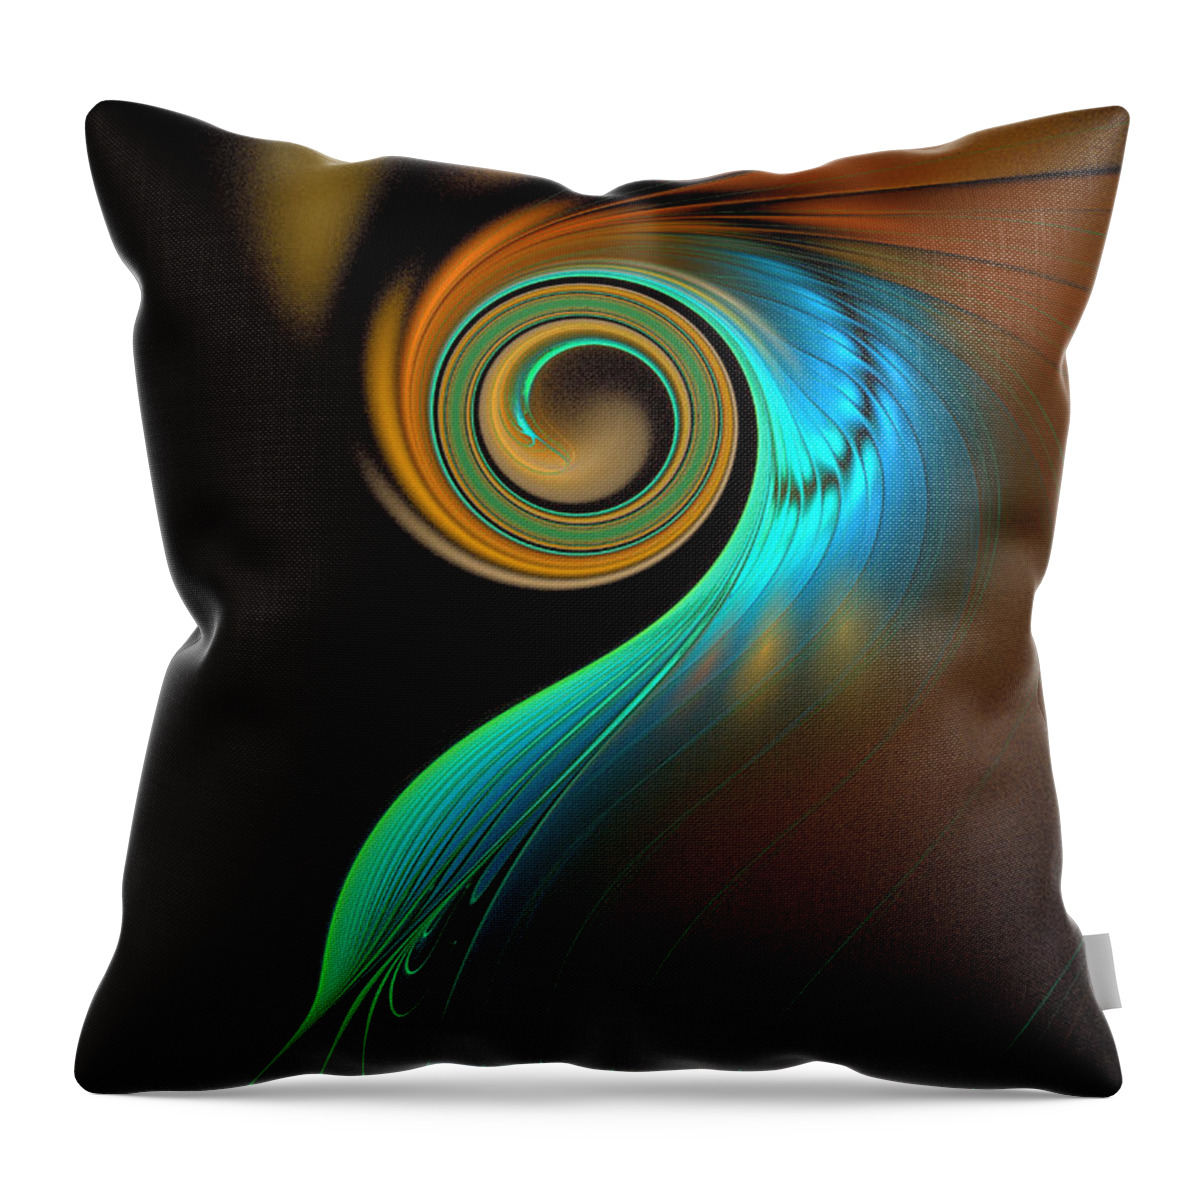 Digital Art Throw Pillow featuring the digital art Fine Feathers #2 by Amanda Moore